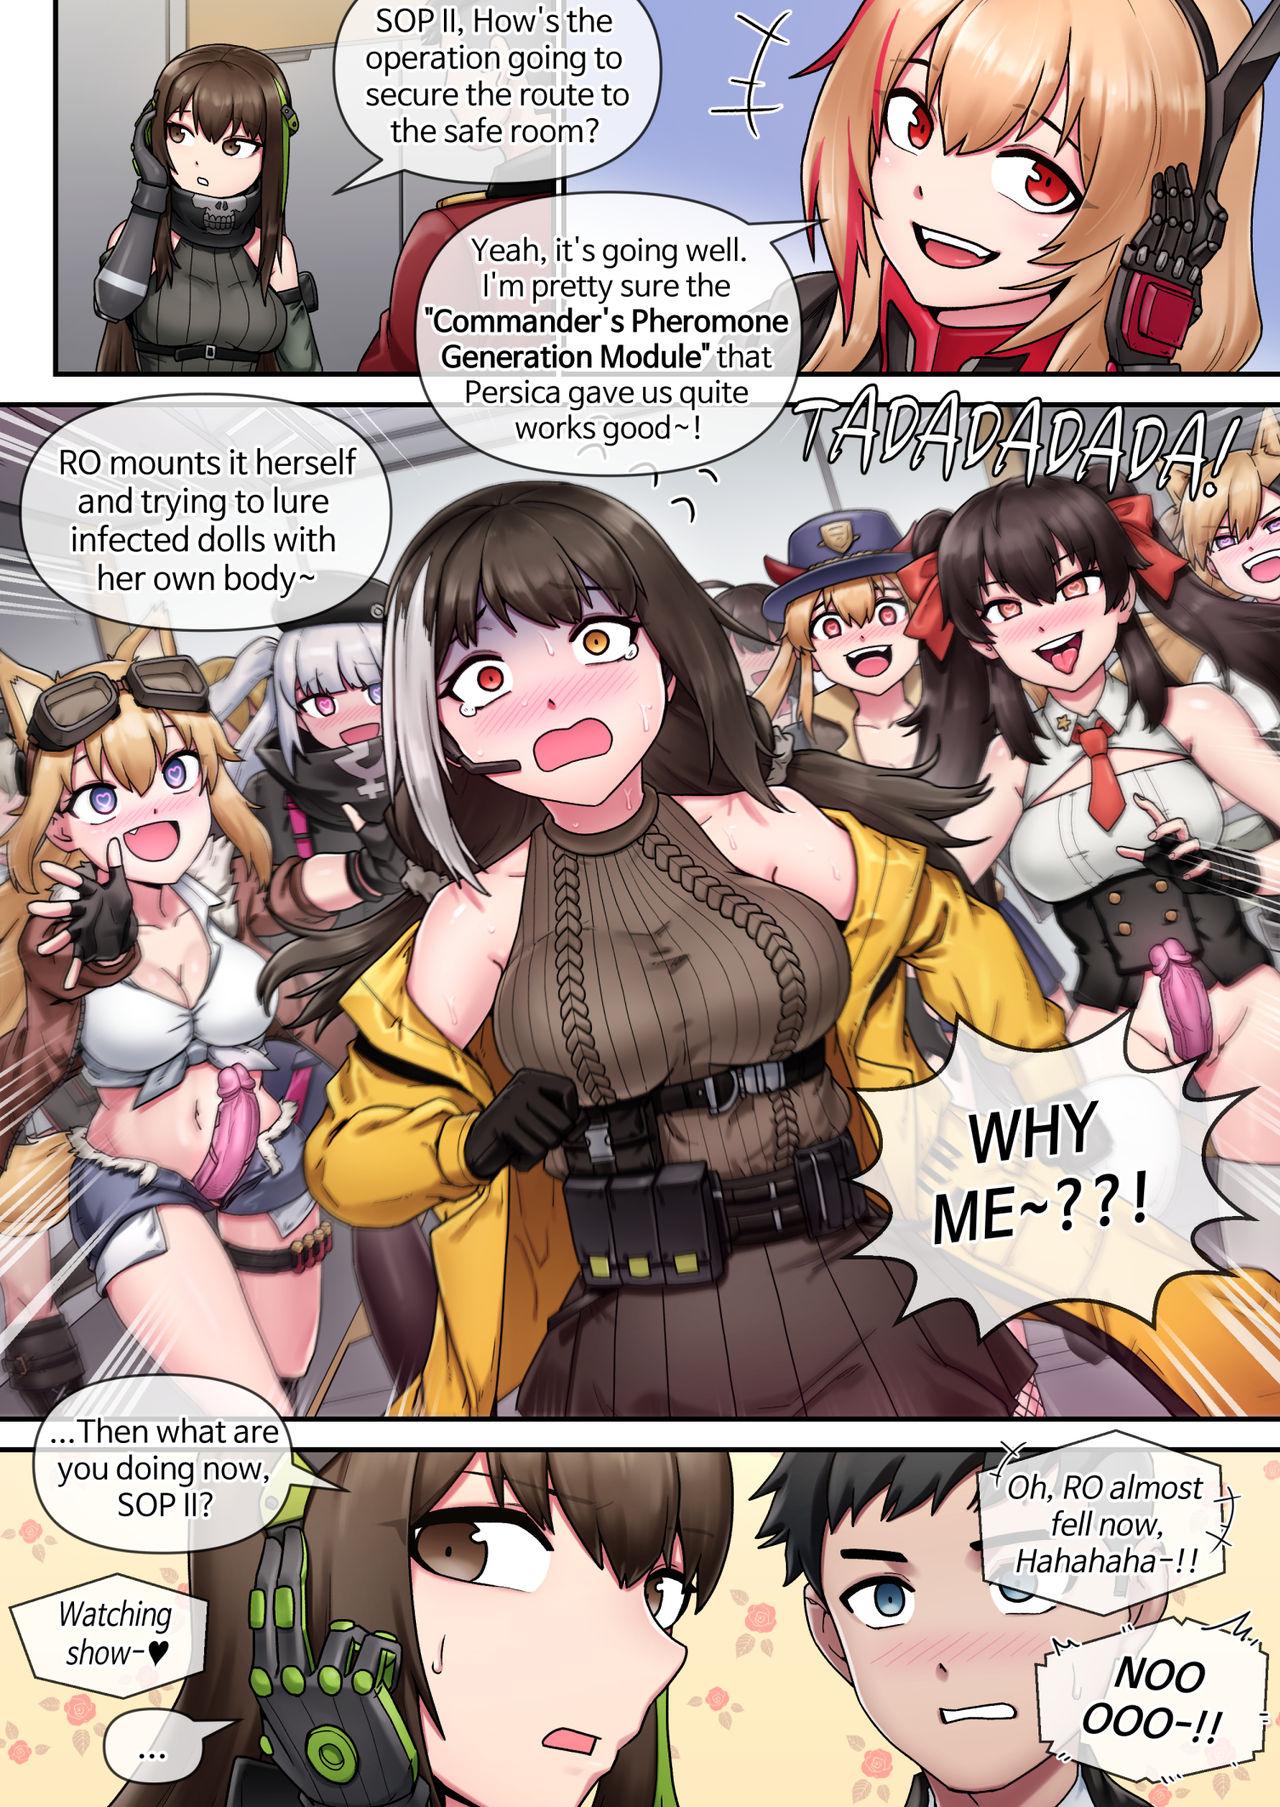 Amazing My Only Princess - Girls frontline Muslim - Page 5